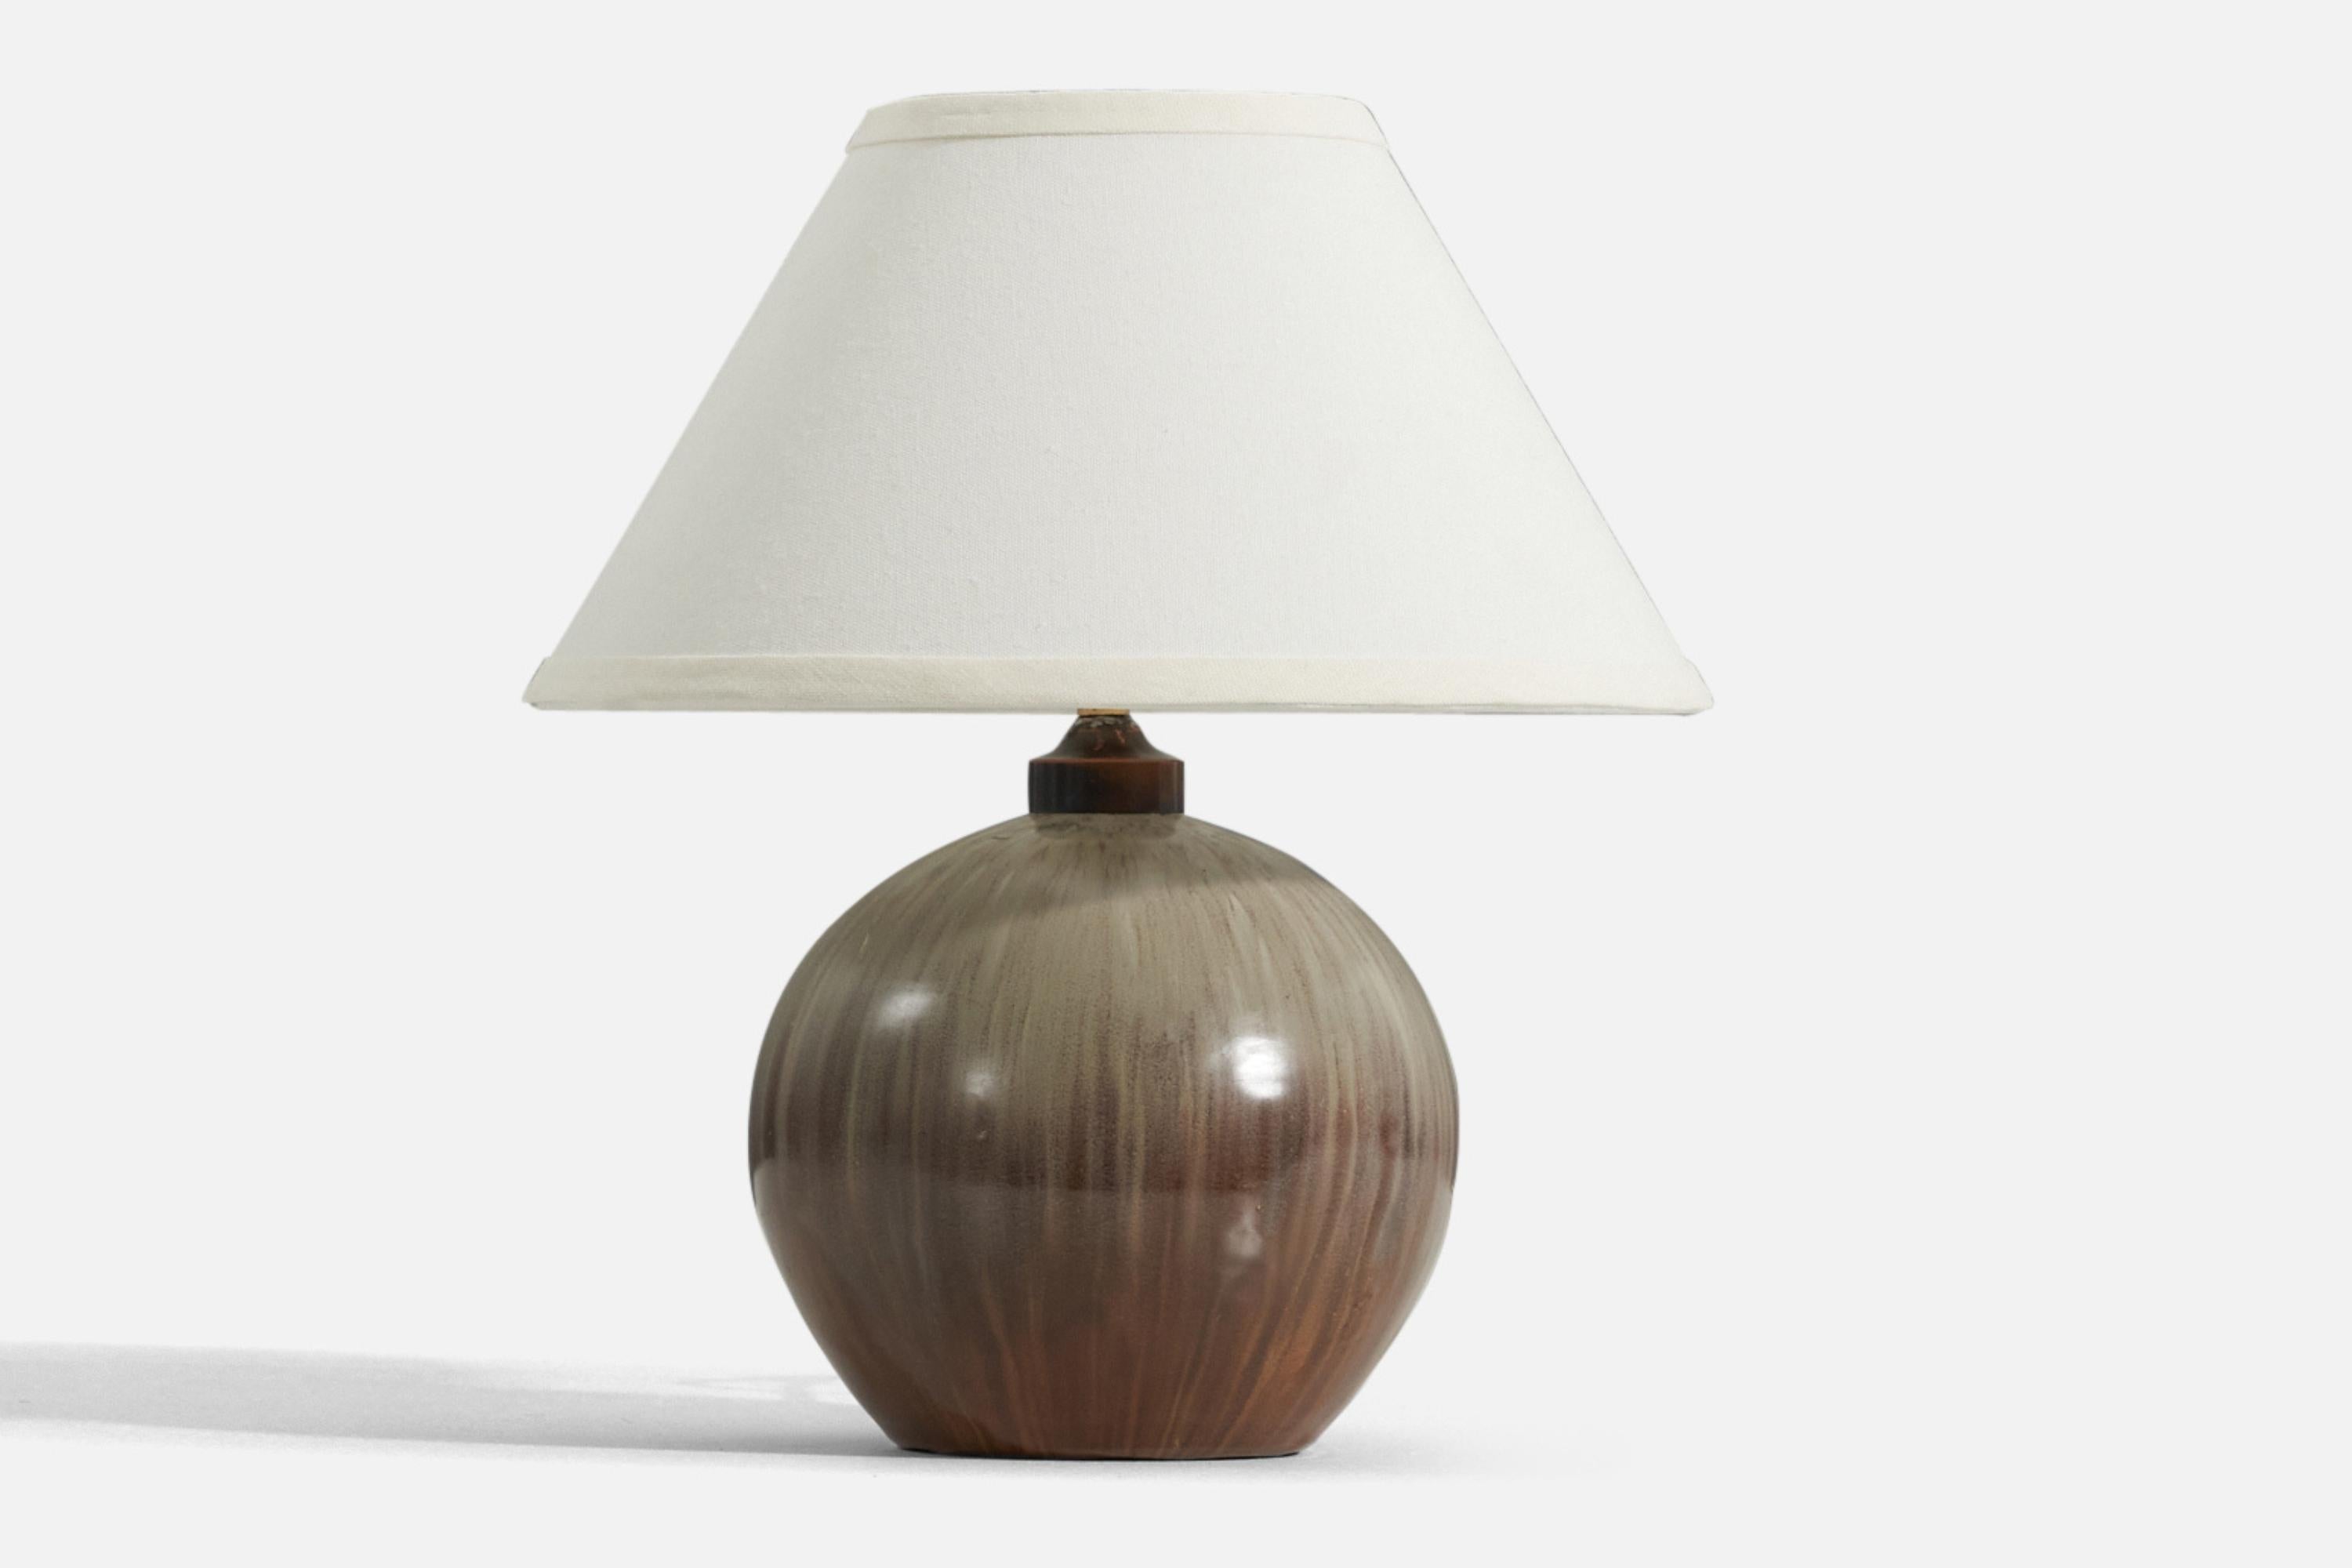 A brown and gray-glazed stoneware table lamp, designed and produced in Denmark, 1940s.

Measurements listed are of lamp. Sold without lampshade. Below dimensions for reference:

Shade : 5.25 x 12.25 x 7.25
Lamp with shade : 13.5 x 12.25 x 12.25.